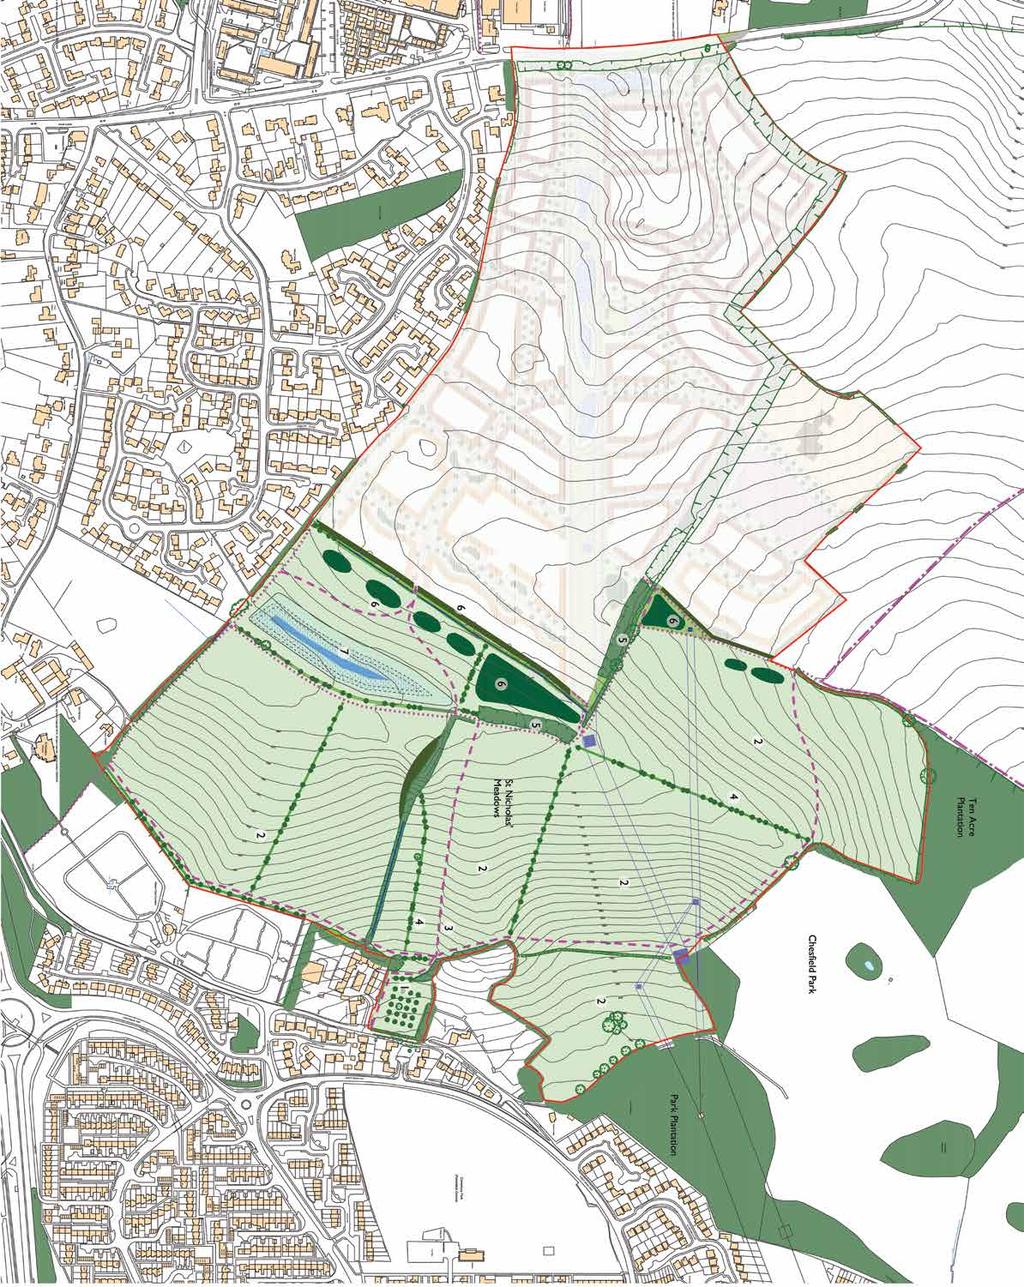 Land North of ST NICHOLAS MEADOWS Our ideas have progressed with full recognition given to the literary significance of the area. There is a need to deliver new homes.